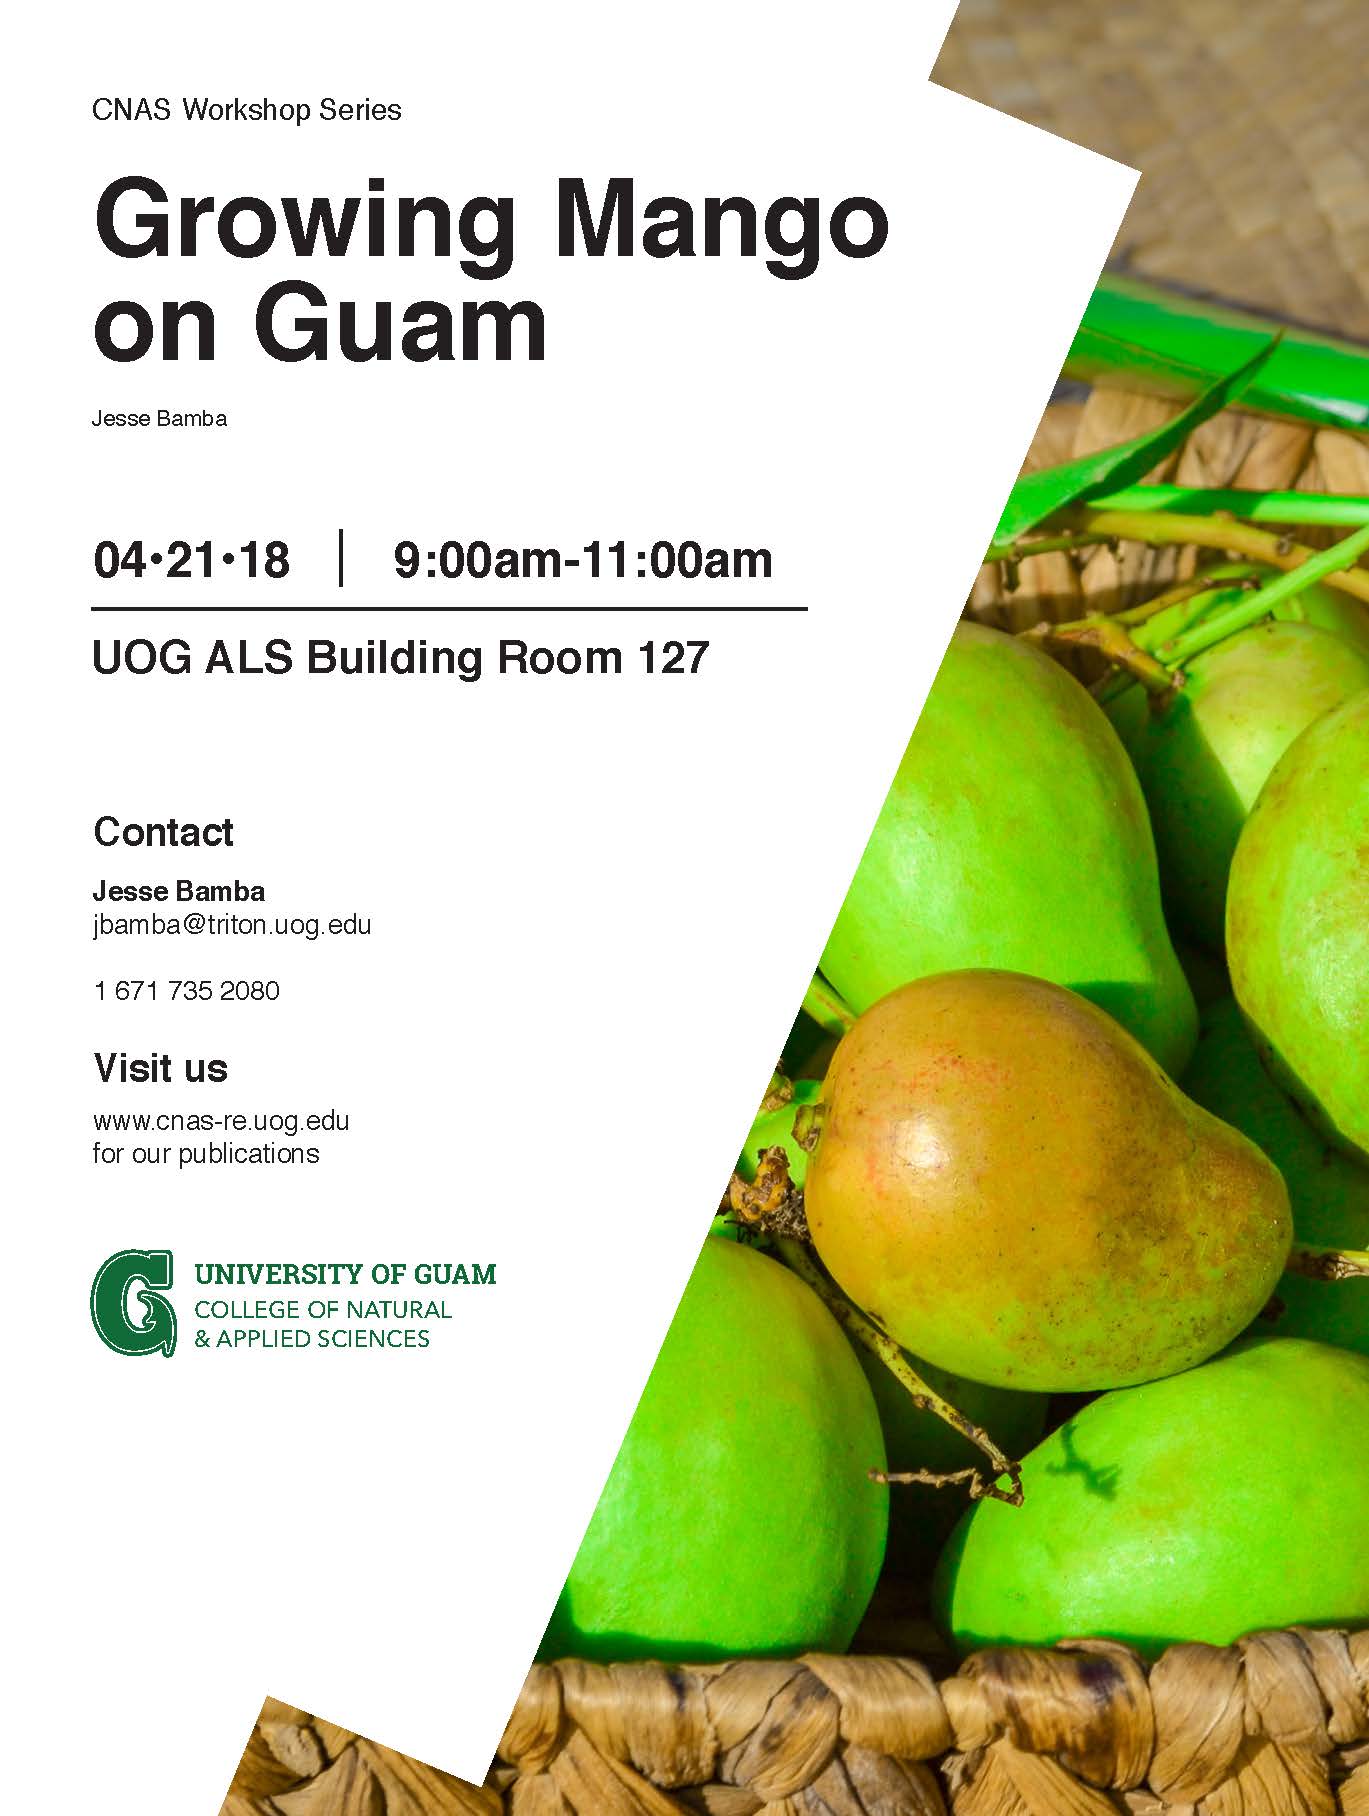 igualdad taquigrafía frágil تويتر \ University of Guam على تويتر: "Mango season is just around the  corner! Learn how to grow and care for your mango tree with CNAS extension  professional Jesse Bamba. For more